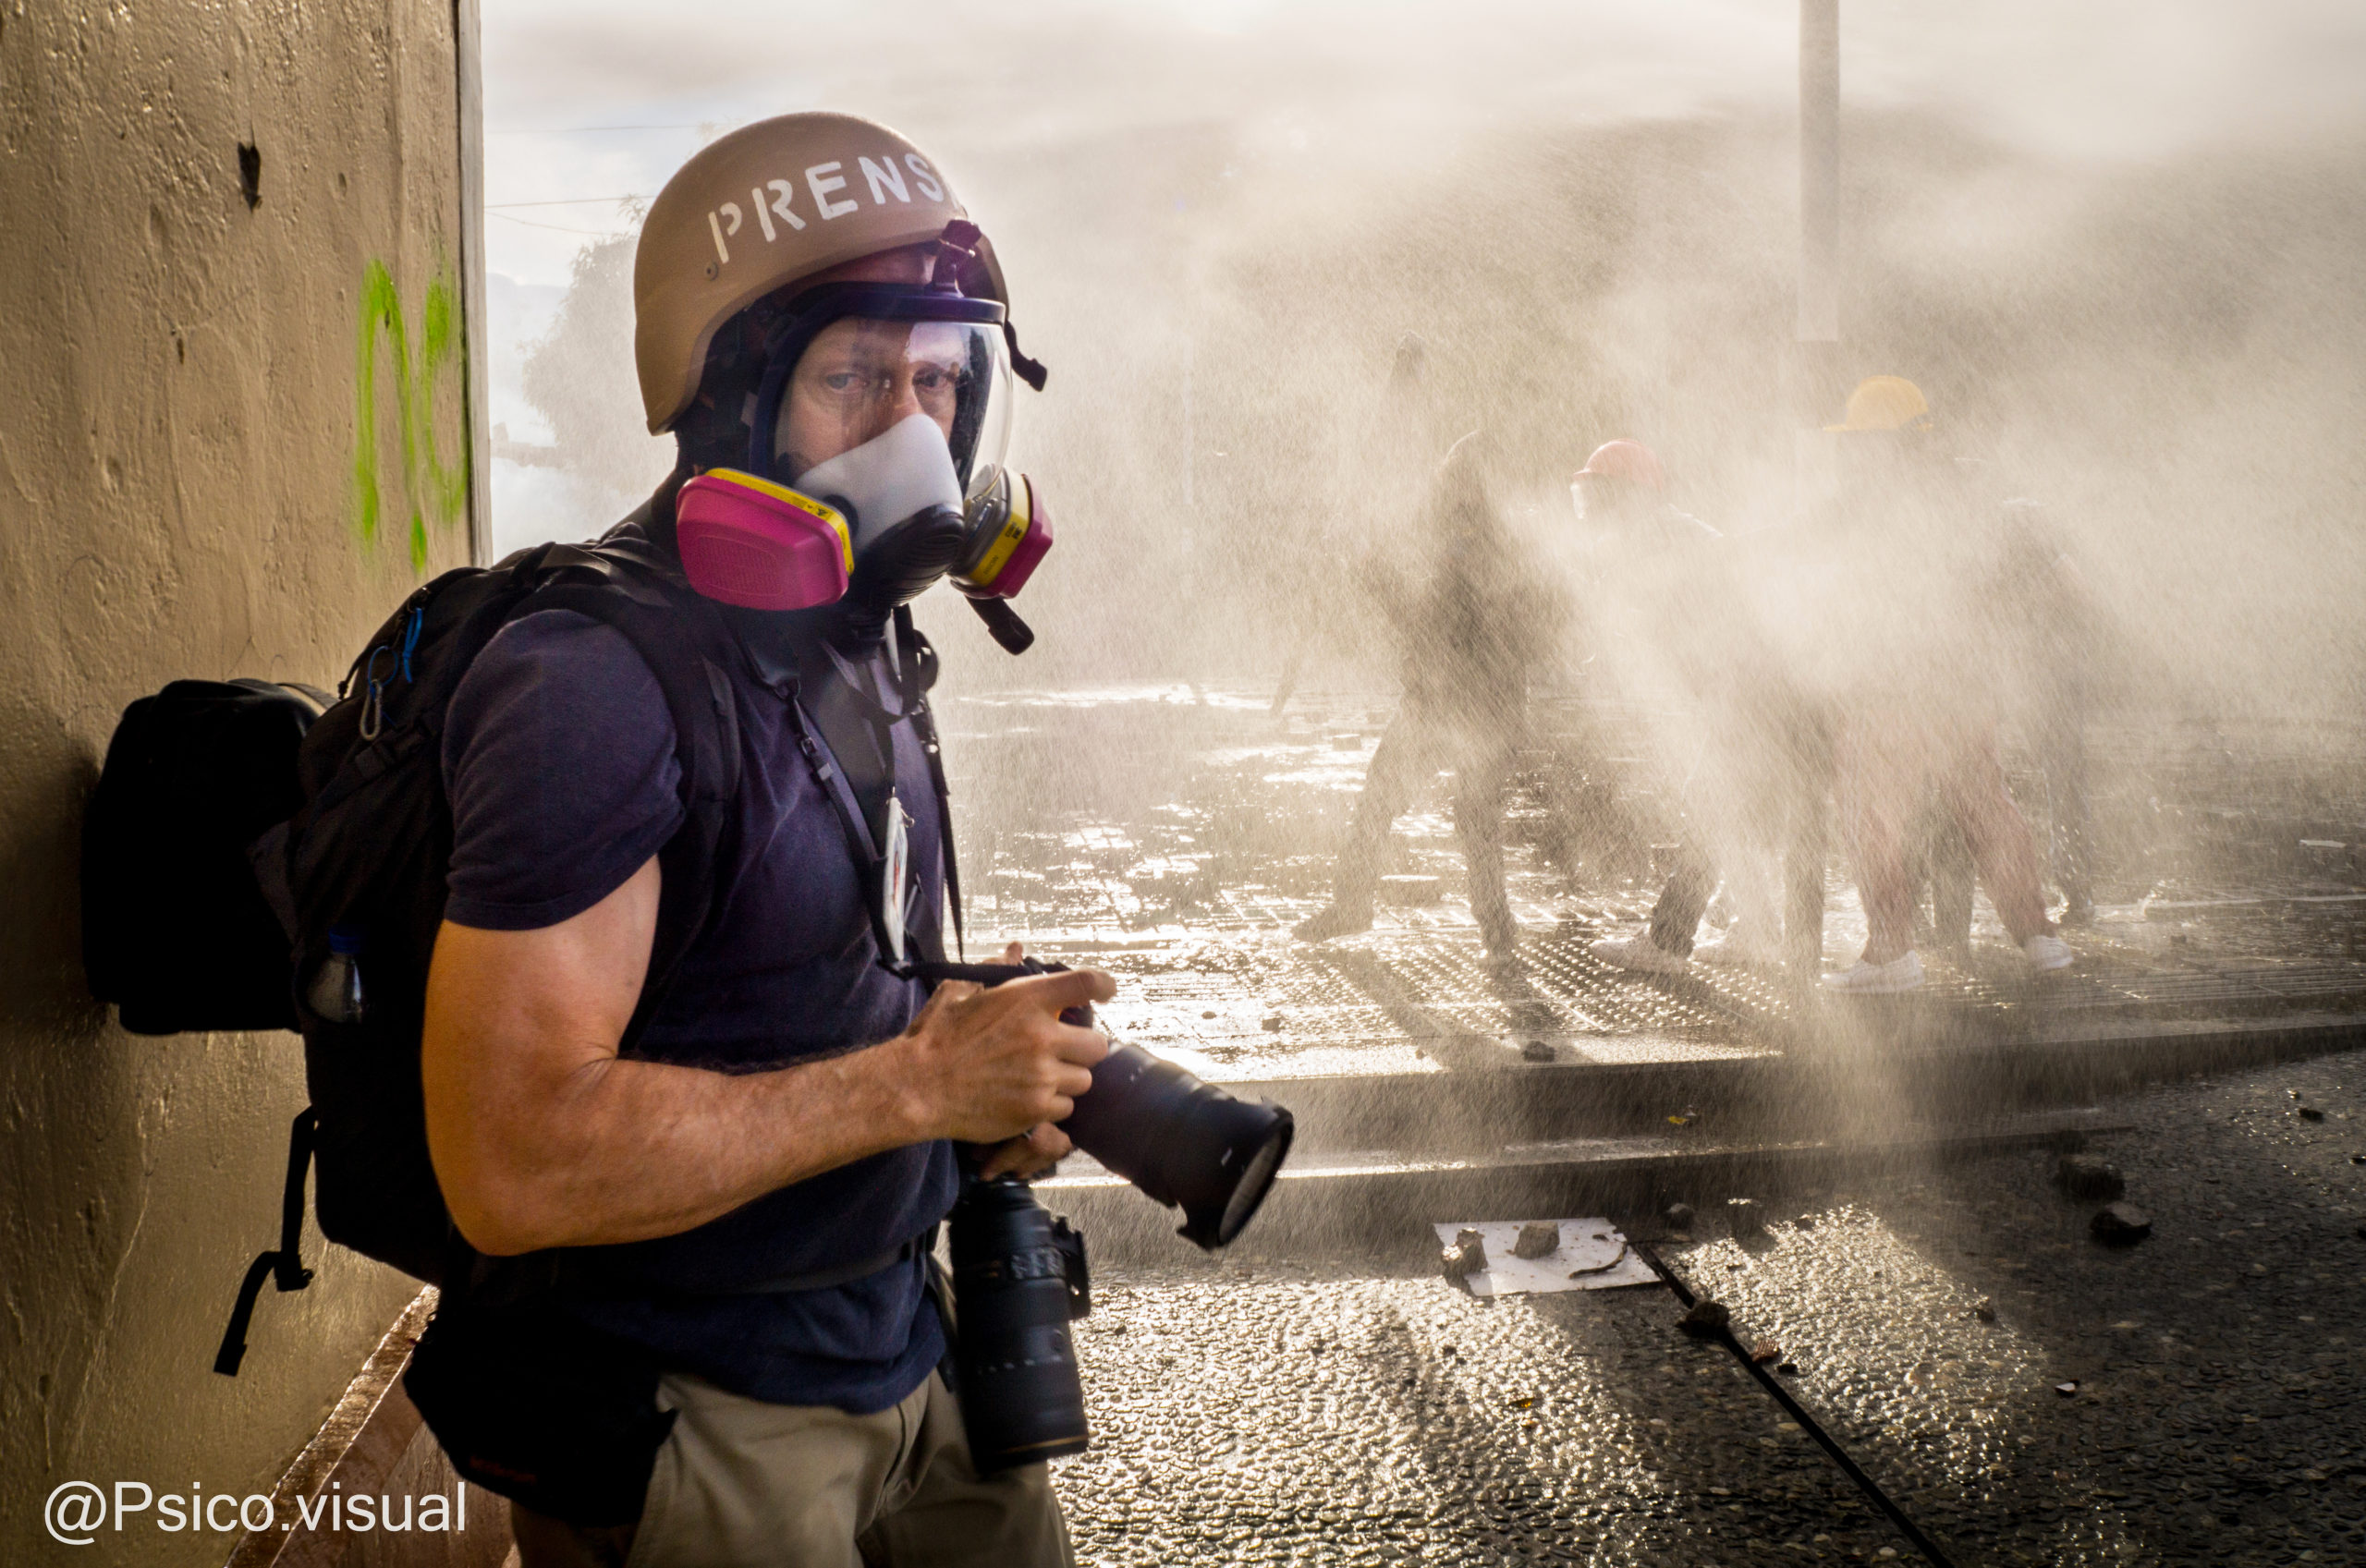 Chris Horn '84 photographed on the job covering political and social unrest in Colombia (Photo provided by Chris Horn)